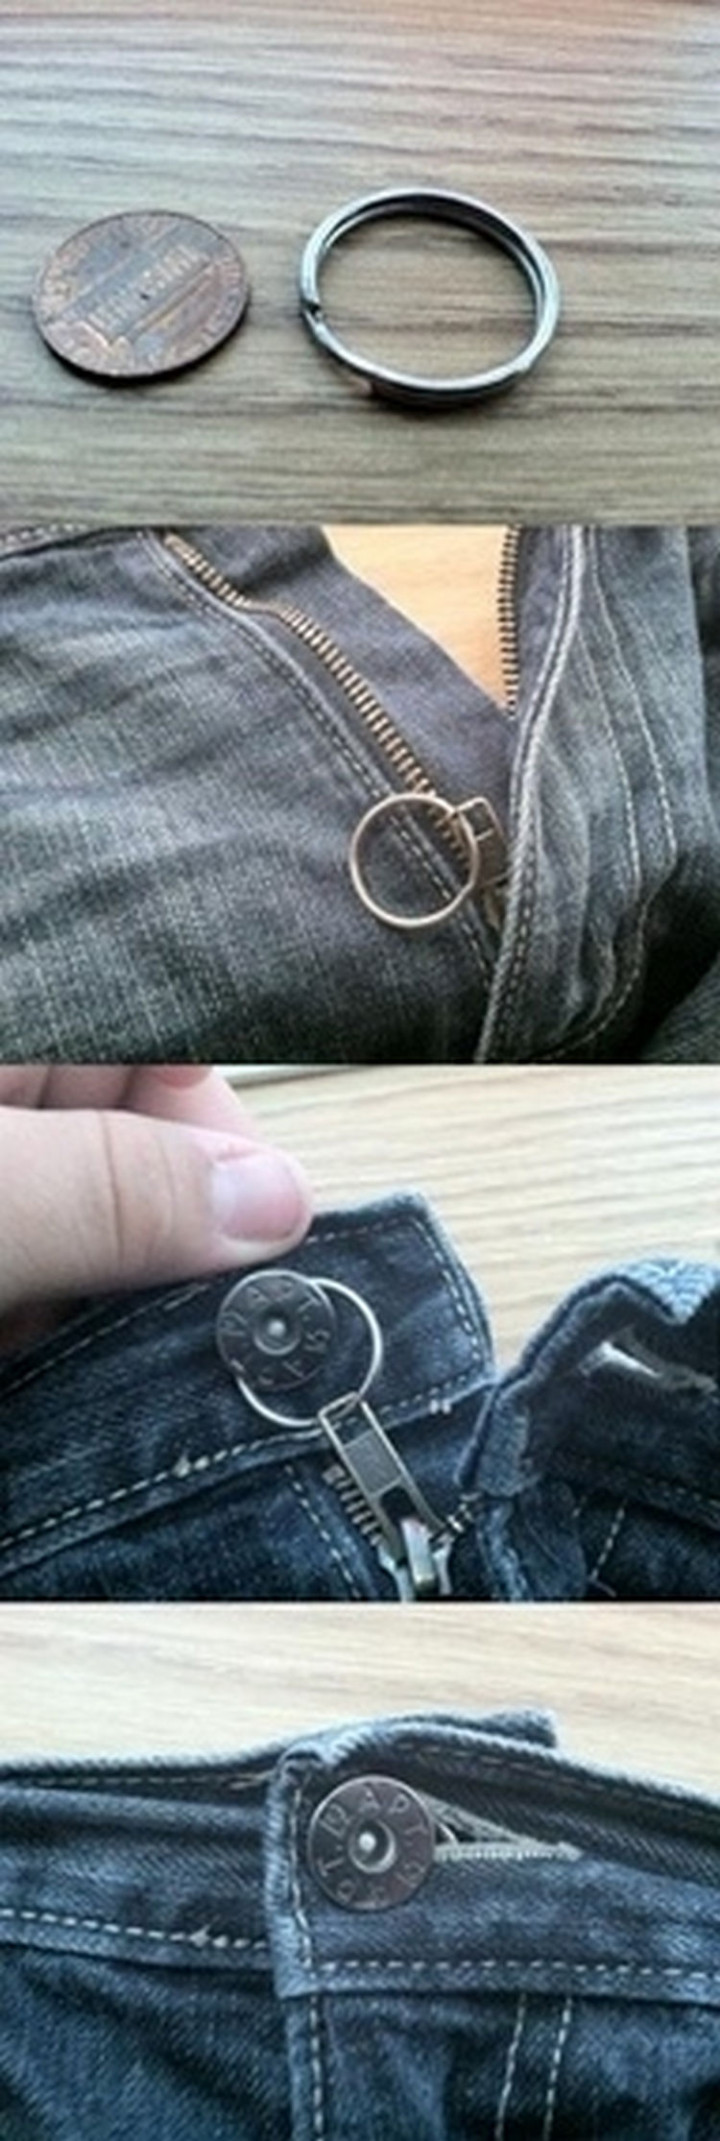 17 Life Hacks to Help Simplify Your Life - Broken or loose zippers are easy to fix by looping a key ring around your pant button.